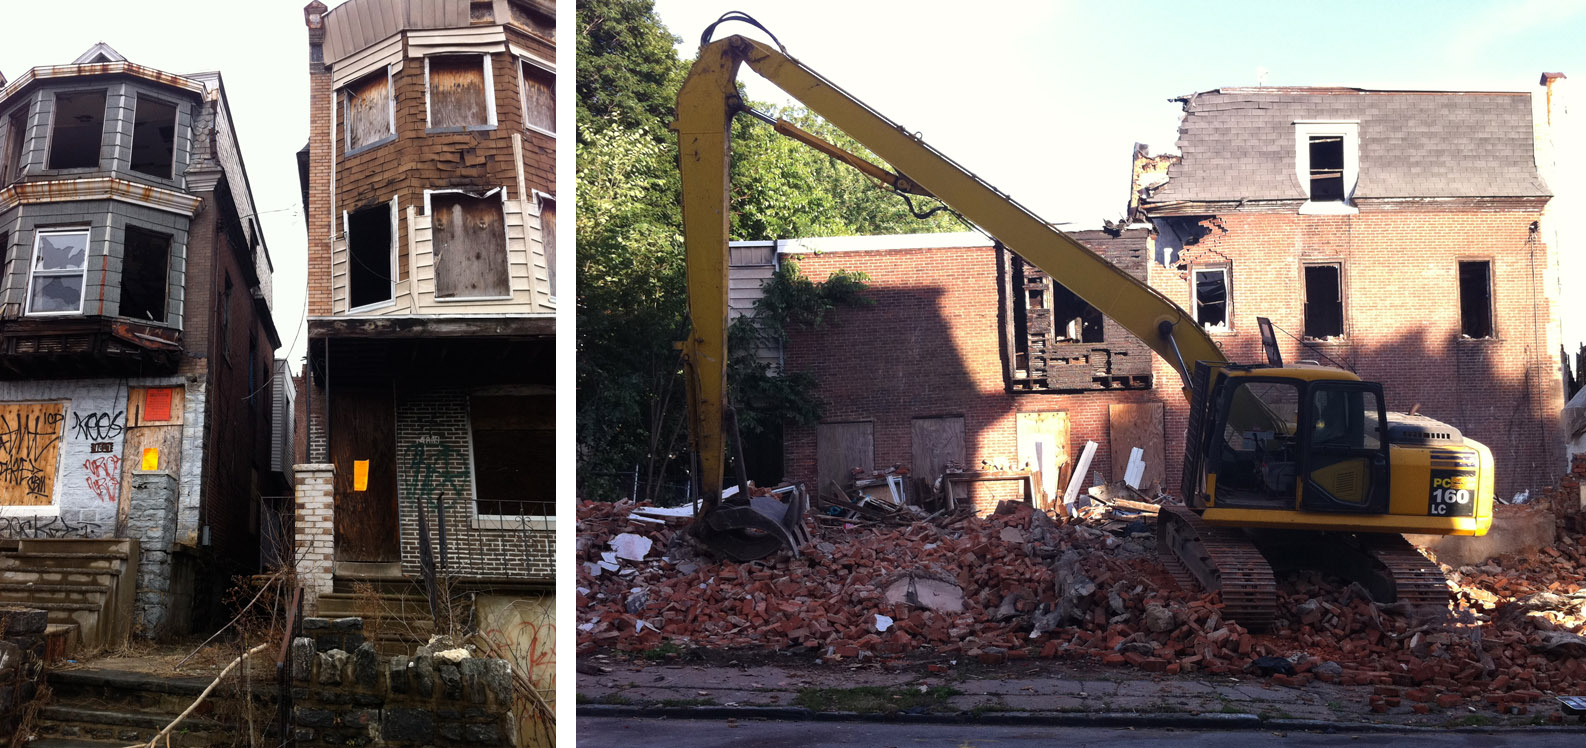 Vacant properties on West Rockland Street before and during demolition. One of the cleared lots was auctioned by PHA.  | courtesy of Aine Doley